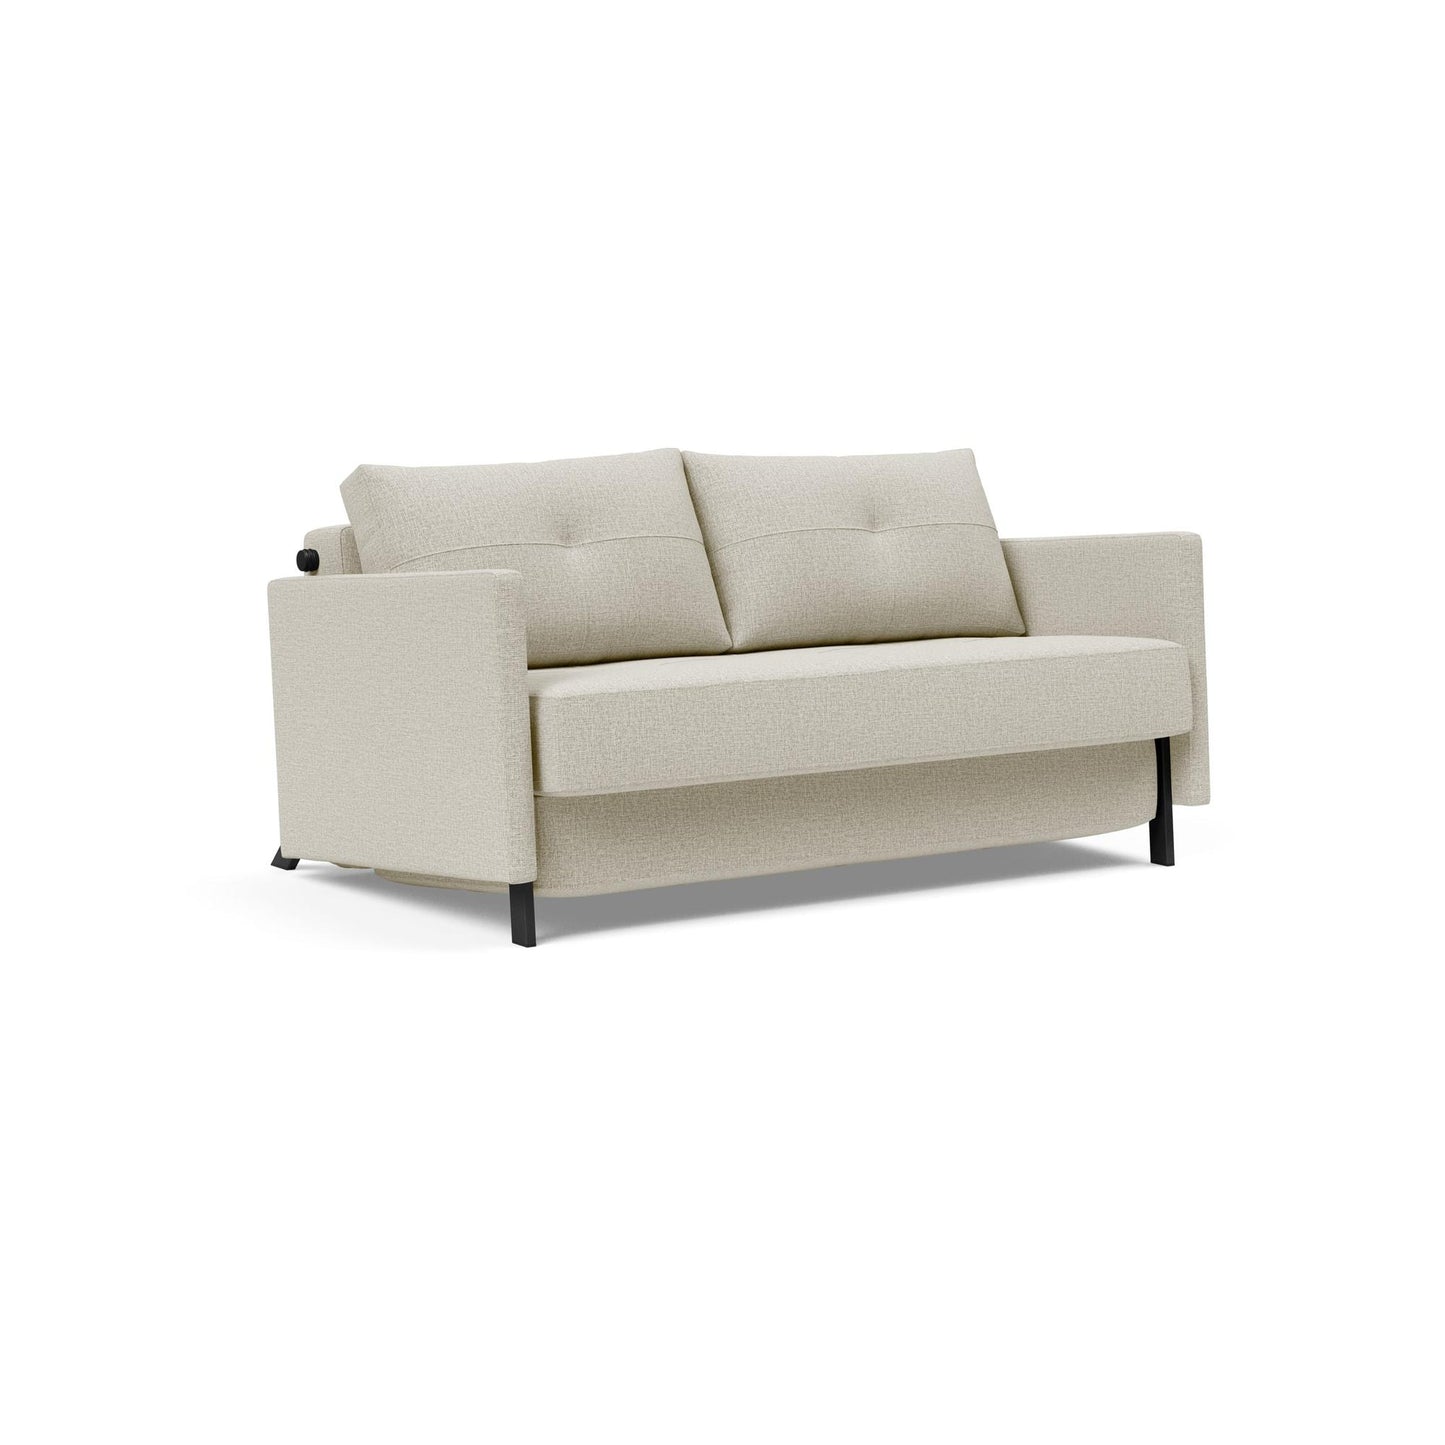 Cubed Deluxe Full Sofa Bed w/Arms in Mixed Dance Natural